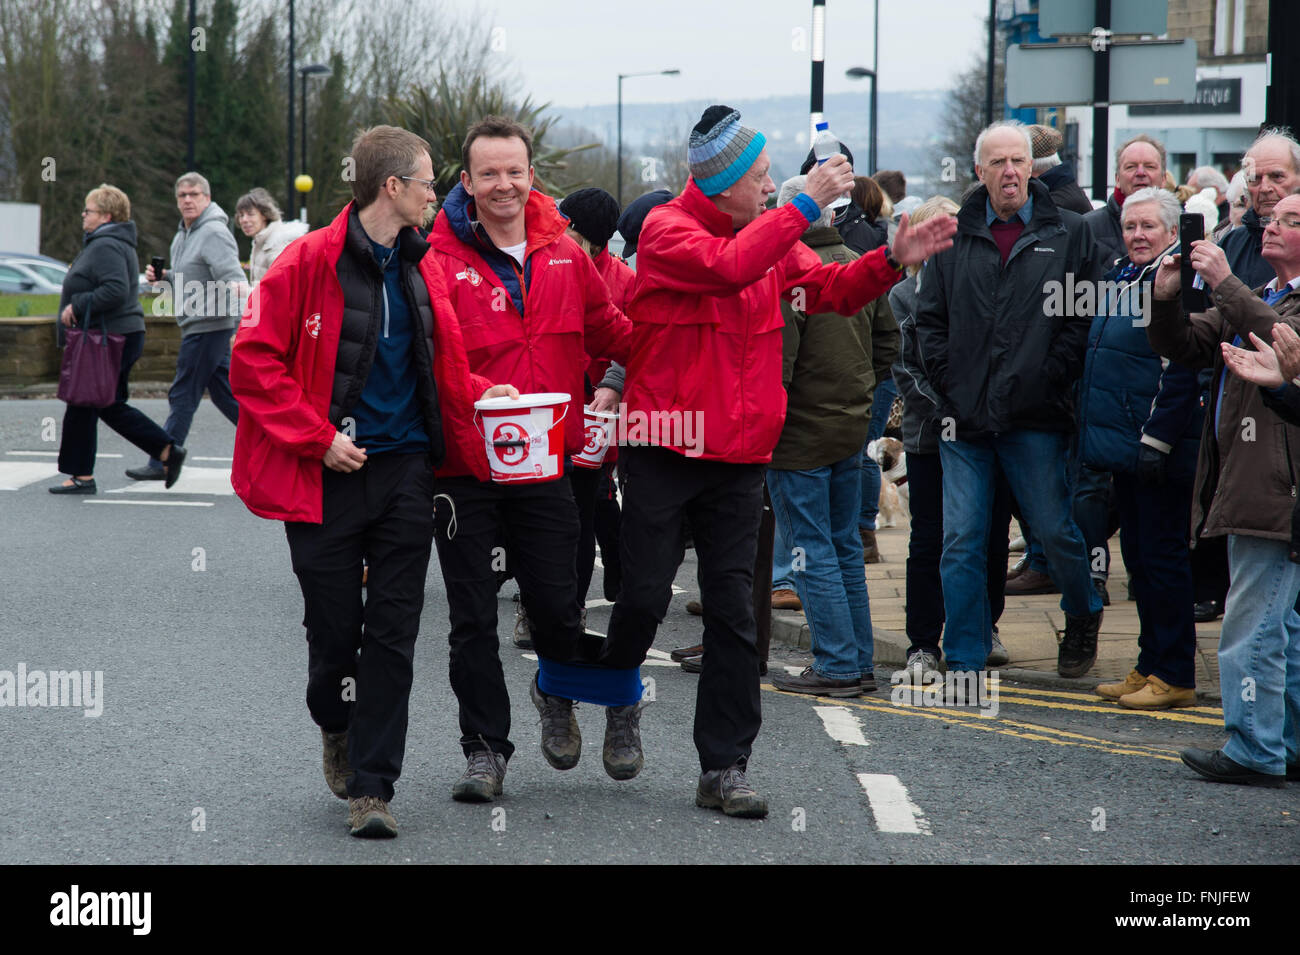 Baildon, West Yorkshire, UK. 15th March, 2016. Look North television presenter Harry Gration (right) and Look North weather man Paul Hudson (left) in Baildon village on day six of their charity three legged walk around Yorkshire for Sport Relief. Credit:  Ian Lamond/Alamy Live News Stock Photo